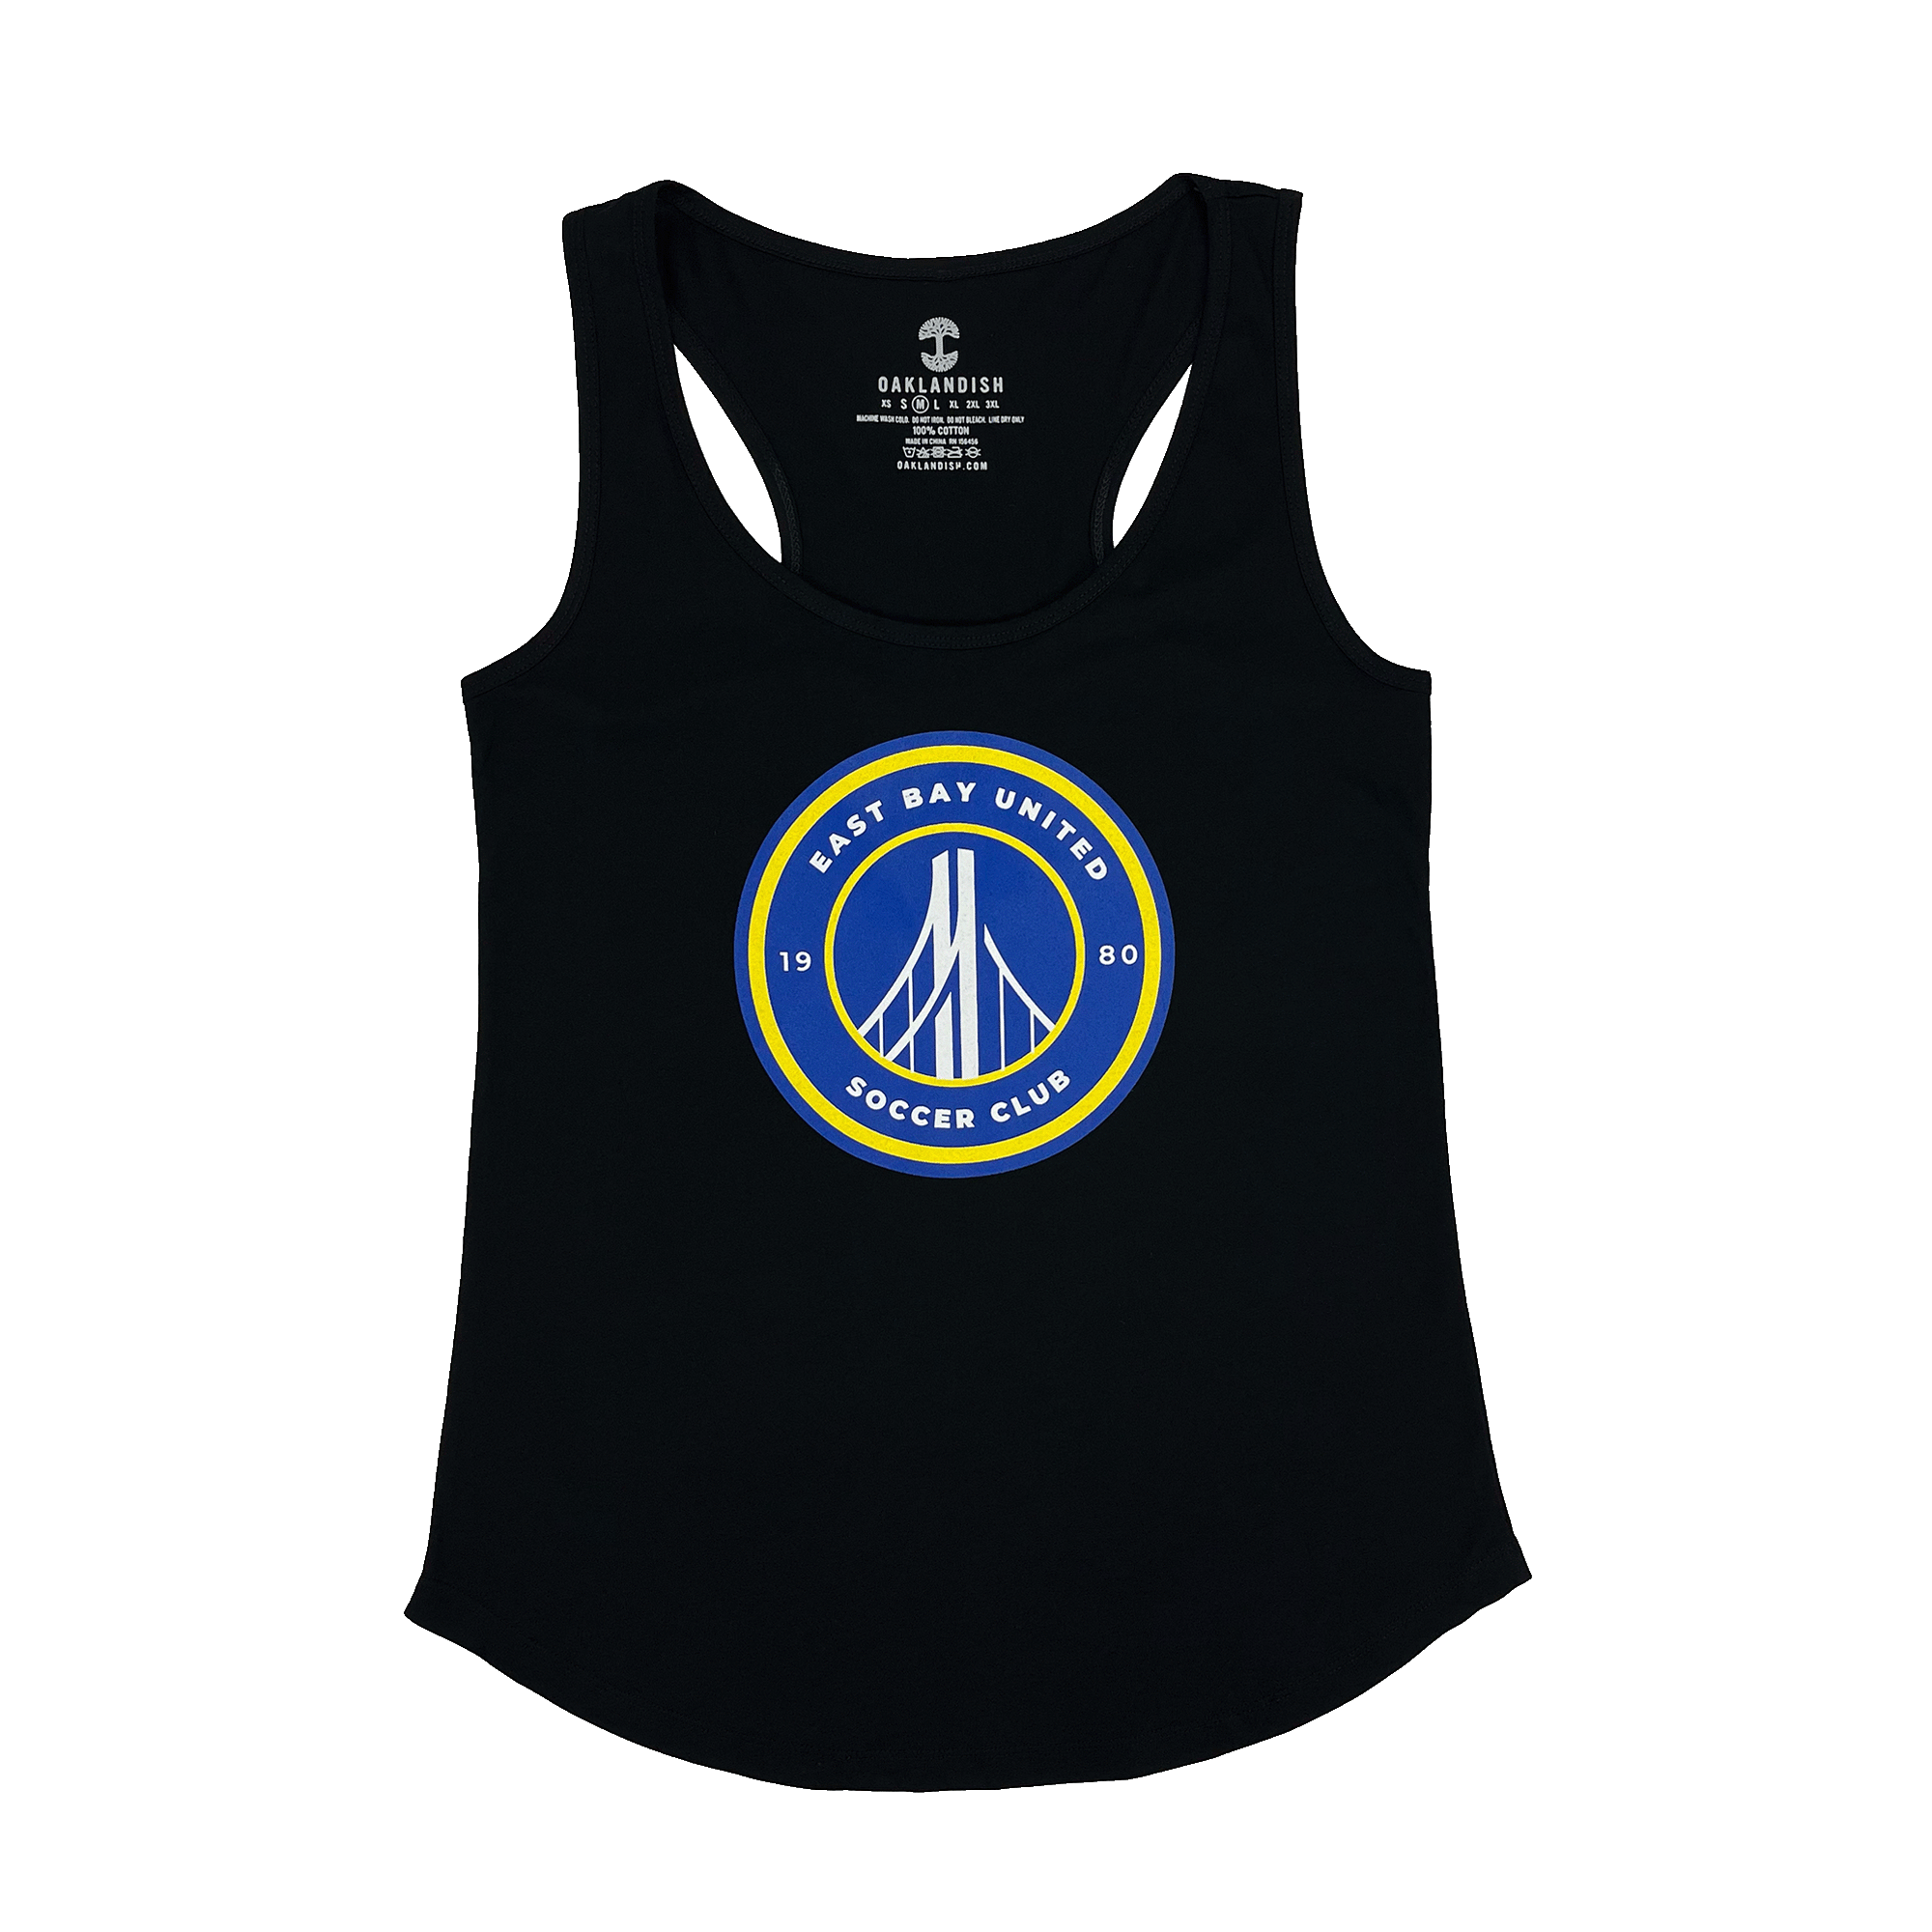 Front view of a black women’s tank top with round blue, white, and yellow East Bay United Soccer Club 1980 logo on the front chest.